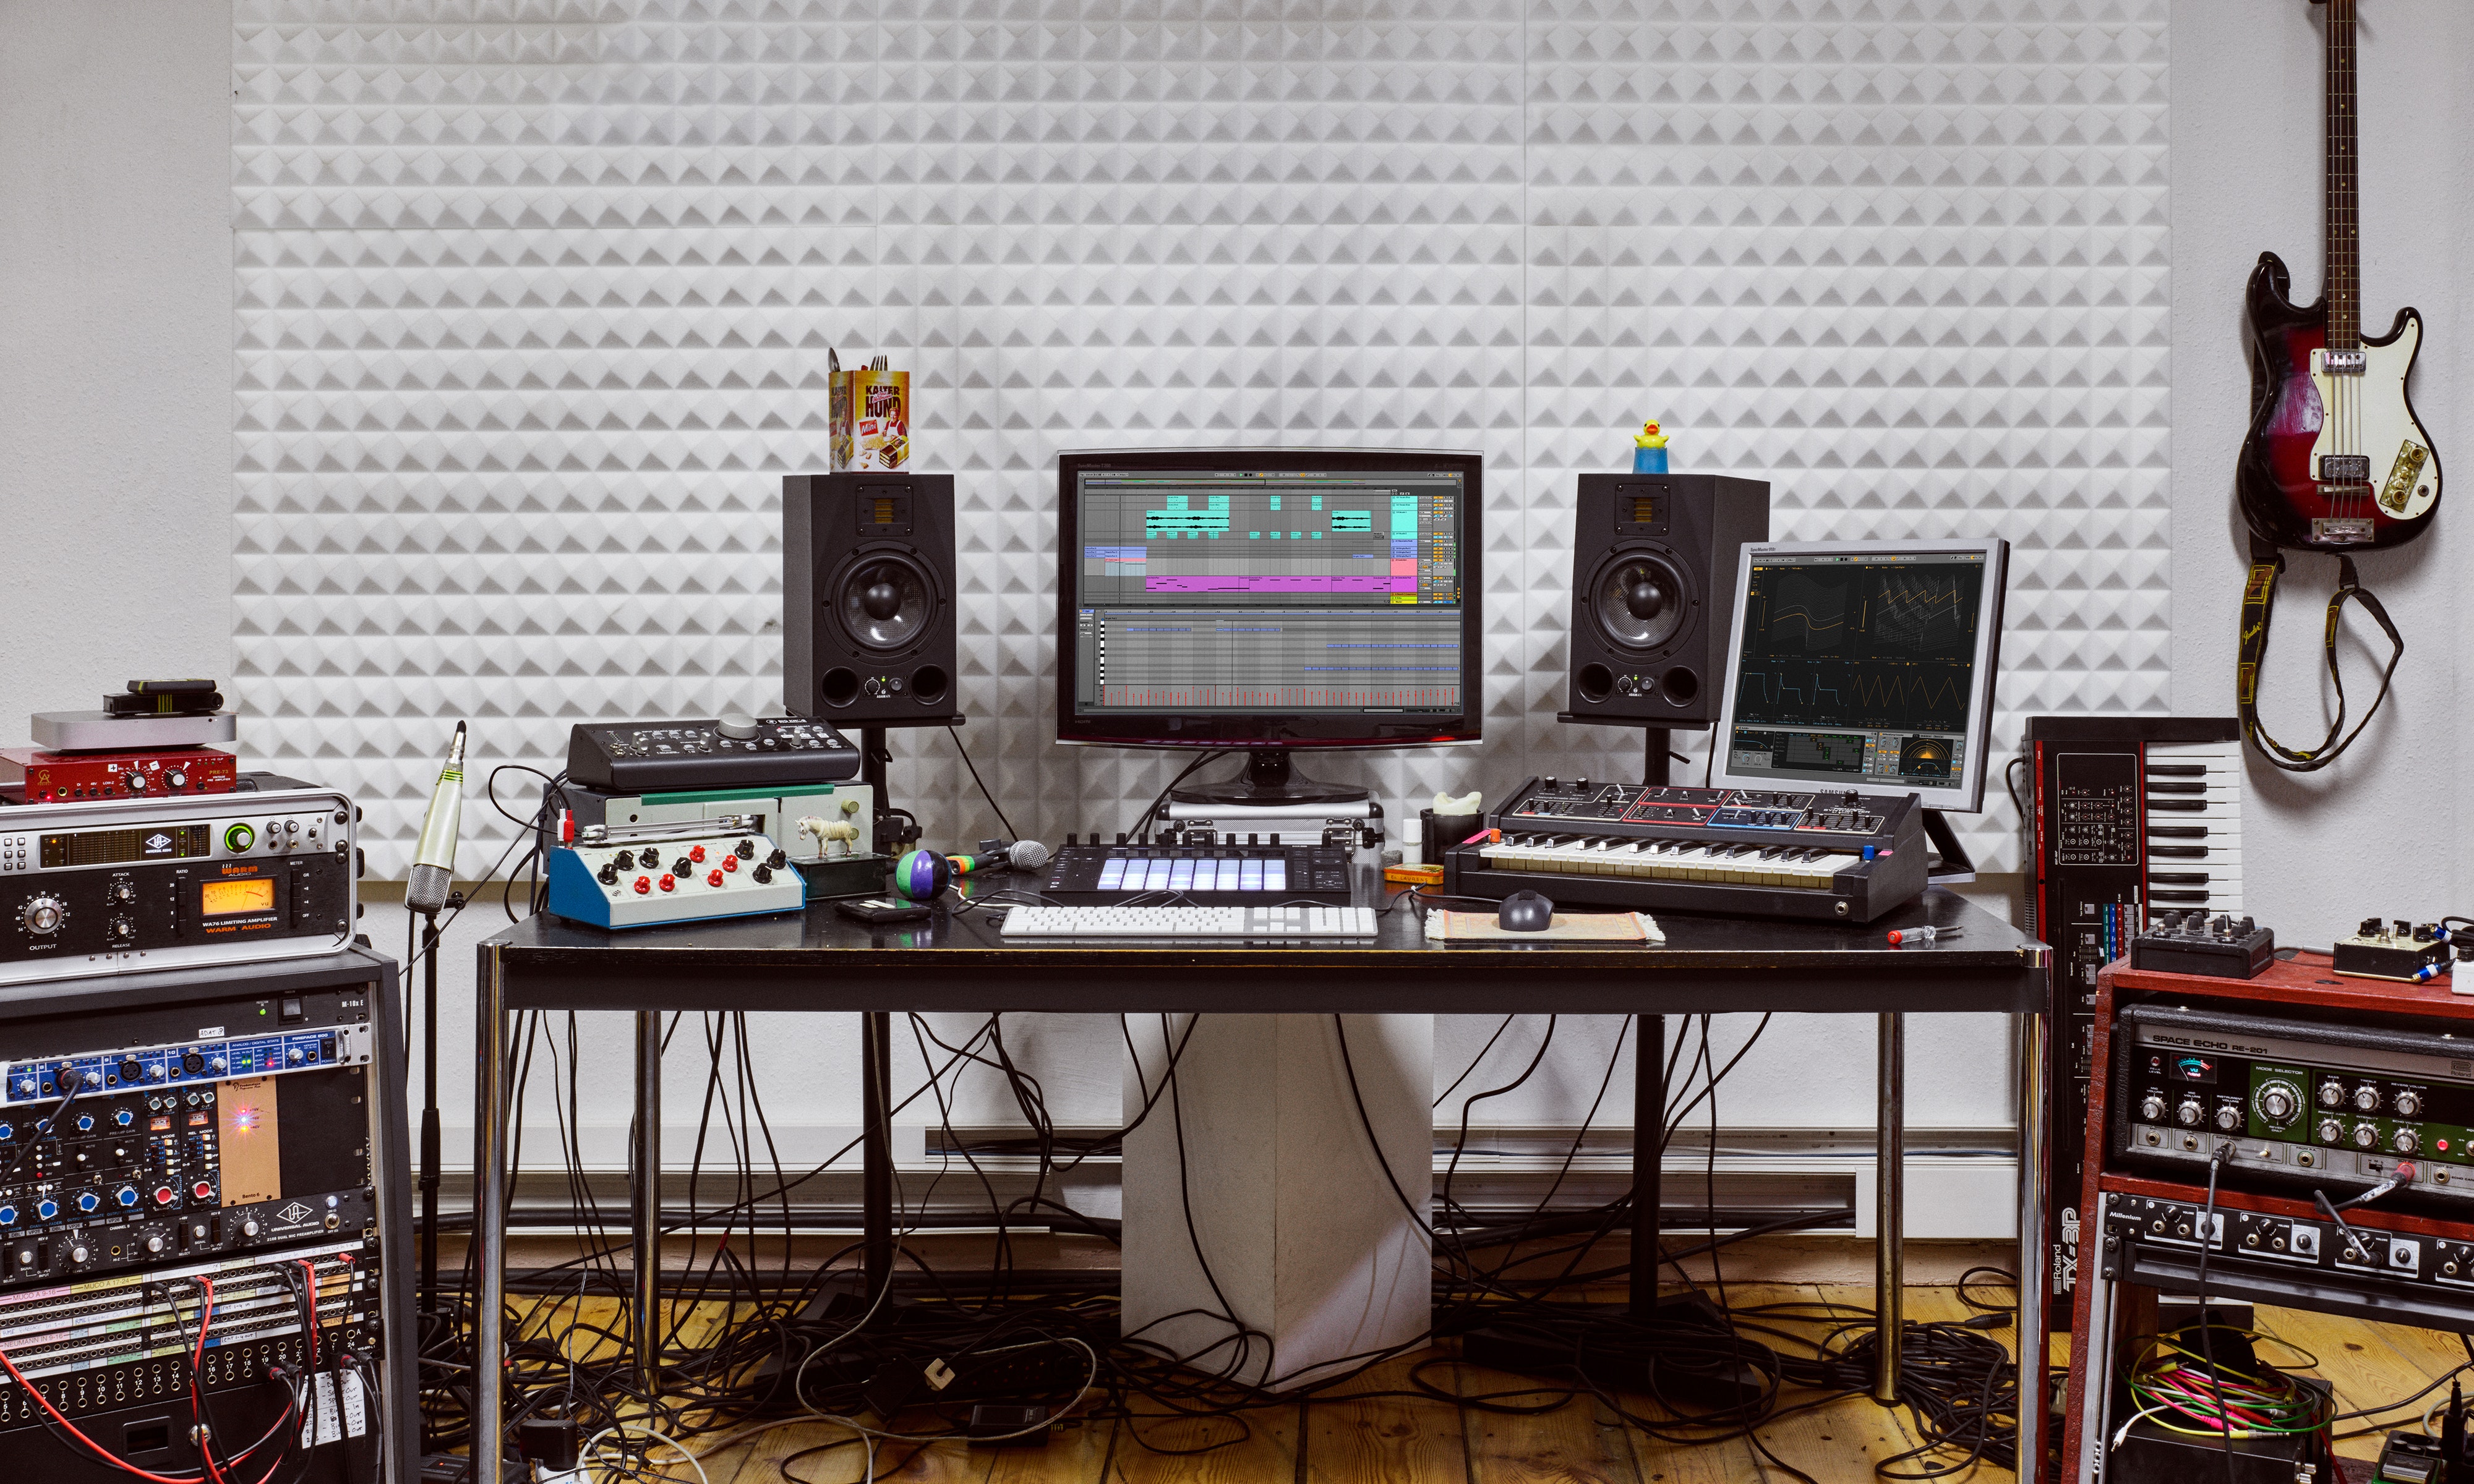 Ableton Announces Live 10 Software, Introduces Much-Desired New Features